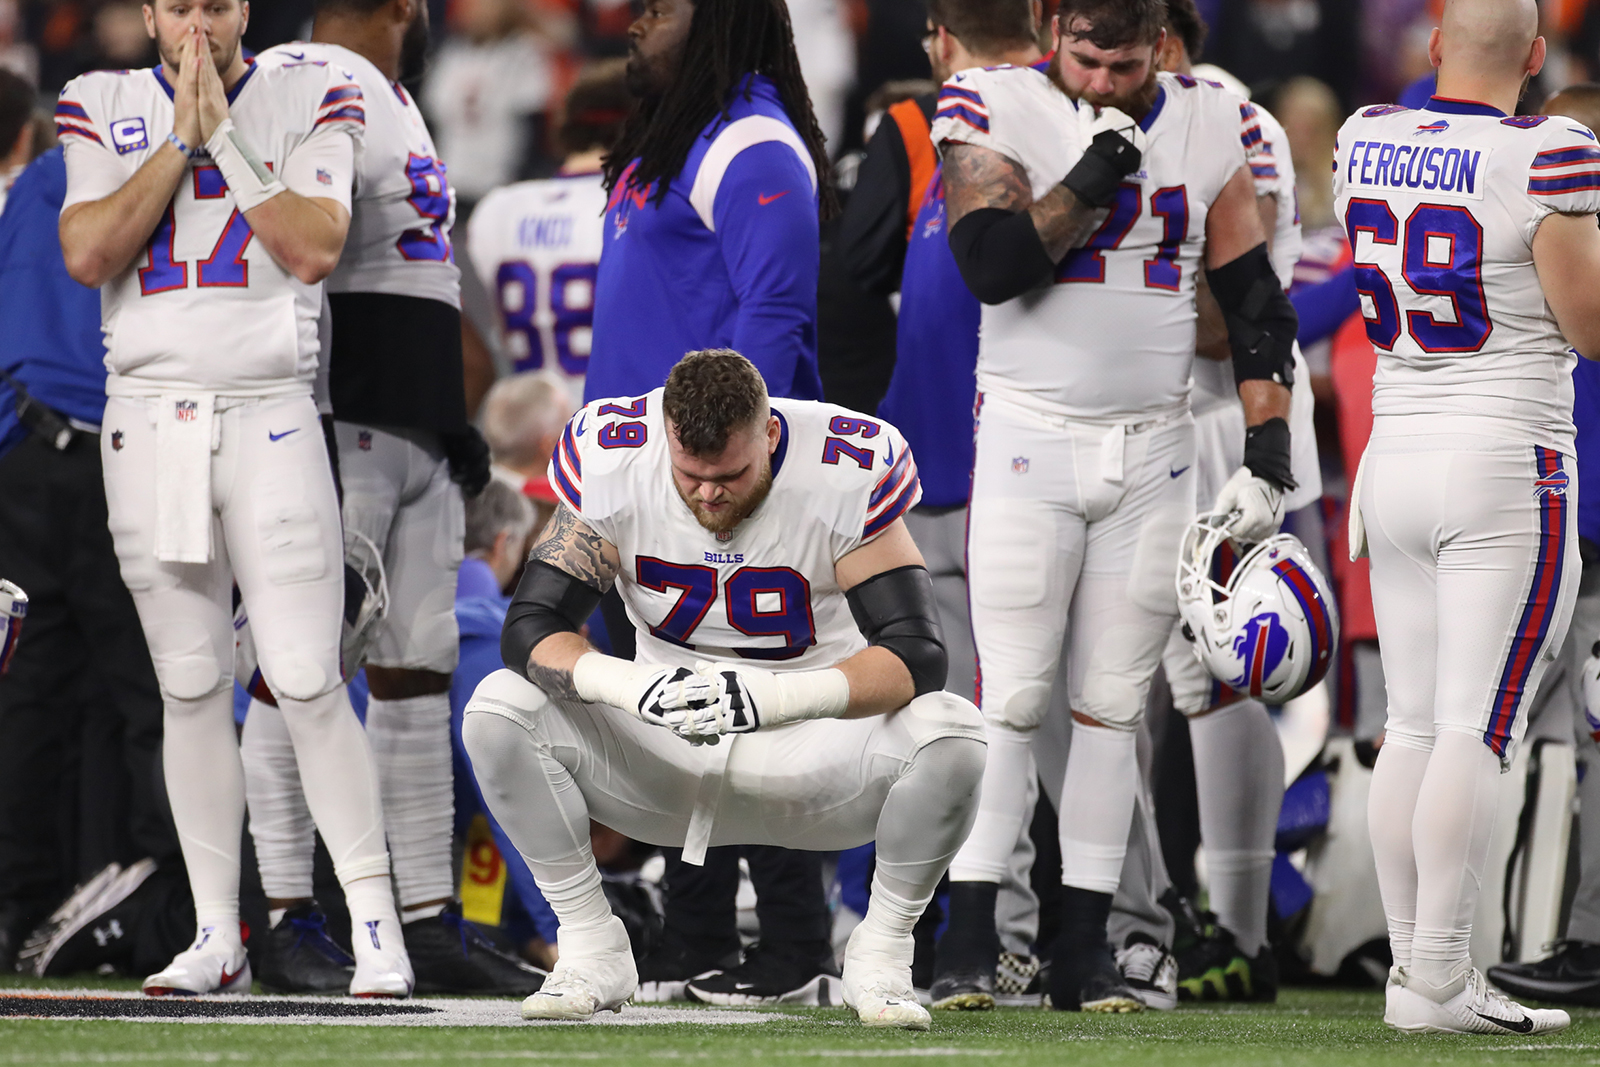 Players’ reaction to Hamlin’s collapse was crucial in postponing the game